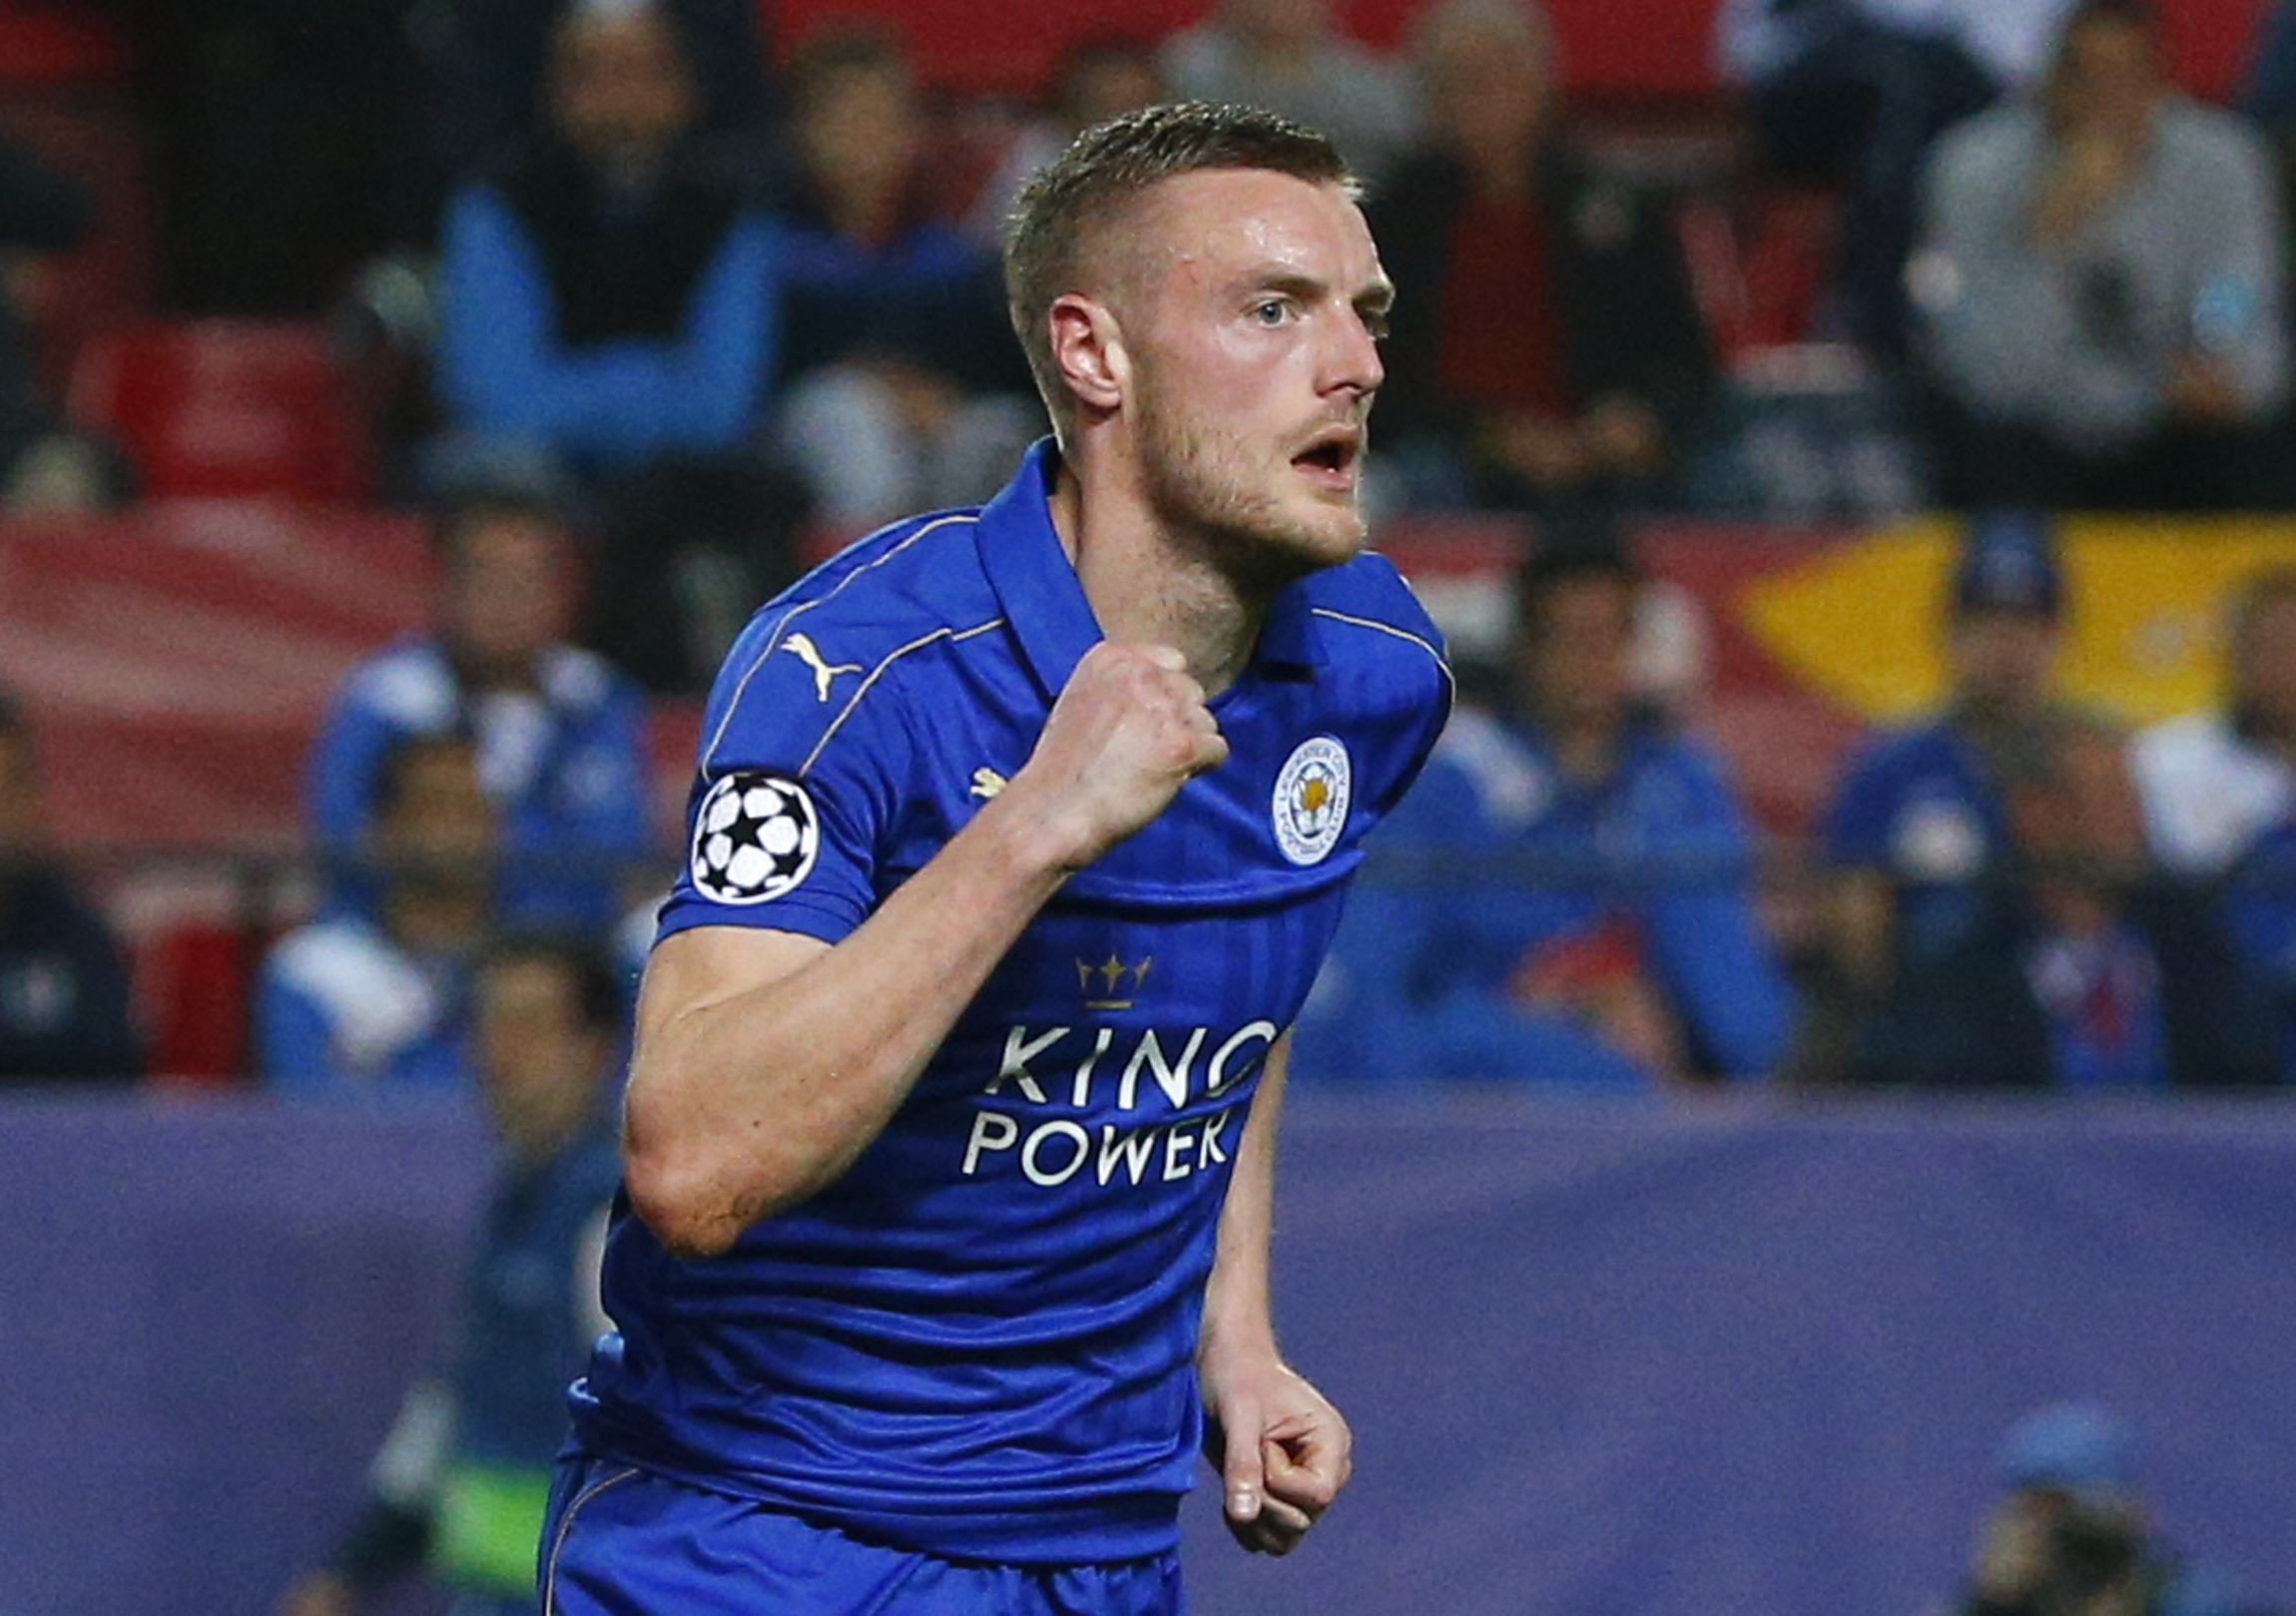 Football: Leicester's Vardy keen to build on Liverpool display